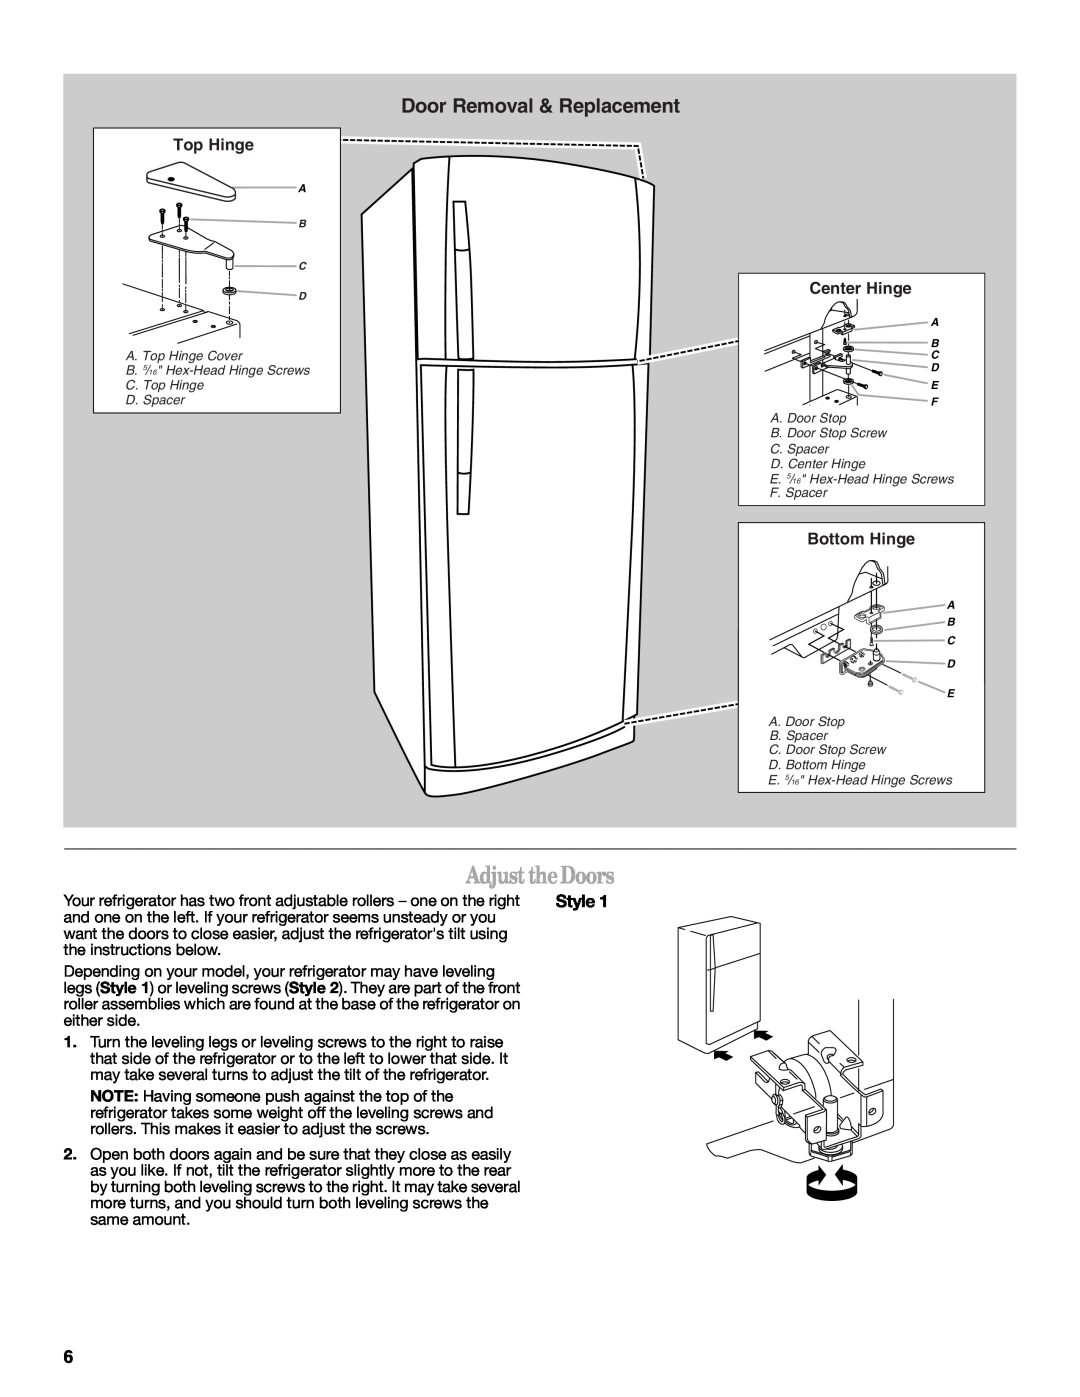 Whirlpool W10217604A Adjust theDoors, Door Removal & Replacement, Top Hinge, Center Hinge, Bottom Hinge, Style 